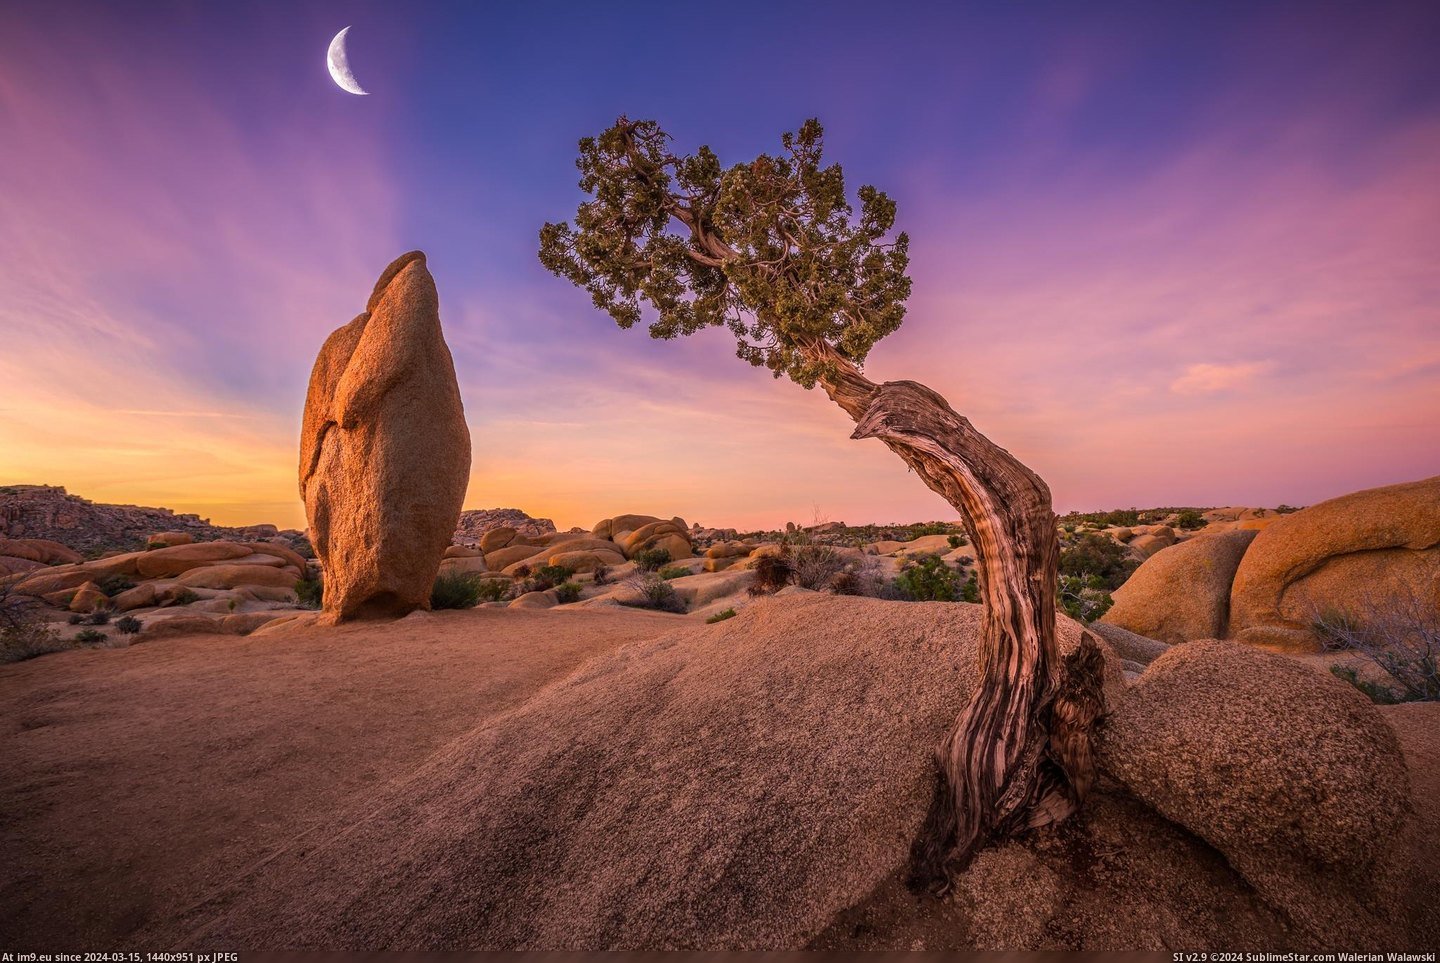 #Park #National #Tree #Rising #Paying #Moon #2048x1365 #Joshua [Earthporn]  Paying Reverence To The Rising Moon, Joshua Tree National Park [2048x1365] Pic. (Изображение из альбом My r/EARTHPORN favs))